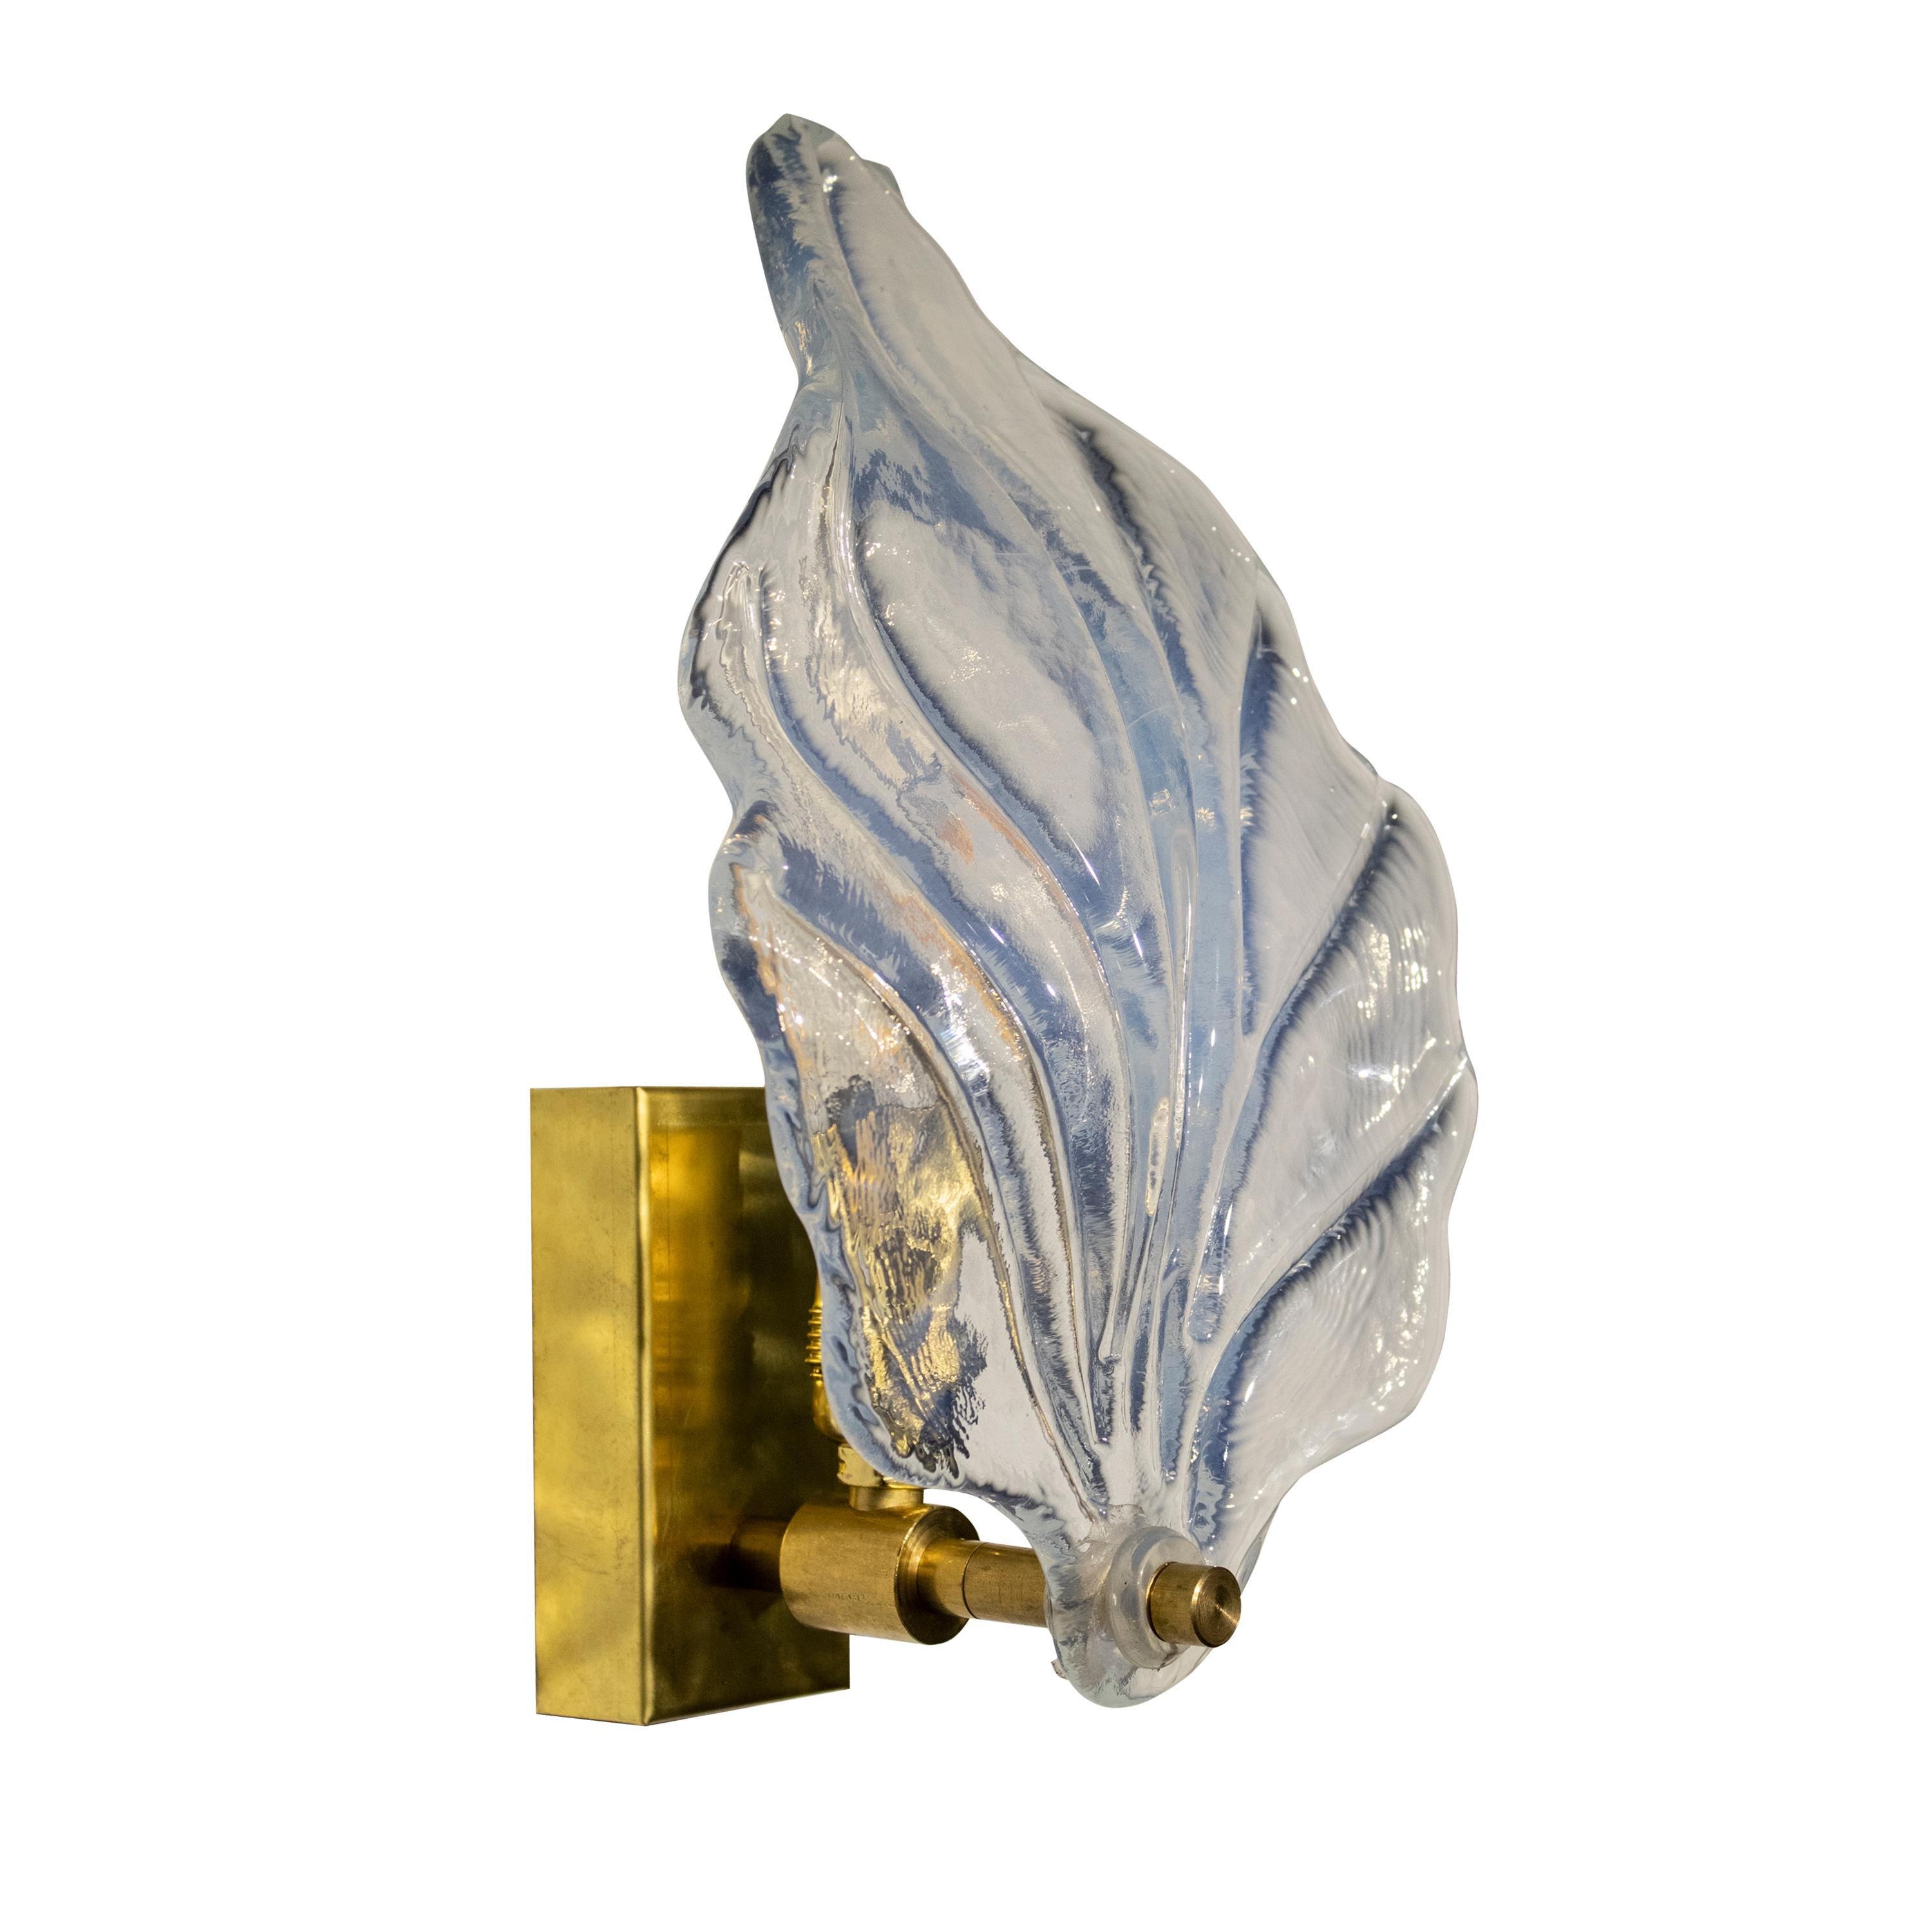 A pair of sculptural Murano glass sconces. Each lamp consists of a leaf- shape glass with a rectangular brass structure.
The sconces are made of hand-carved and hand-molded transparent Murano glass with veins and lines